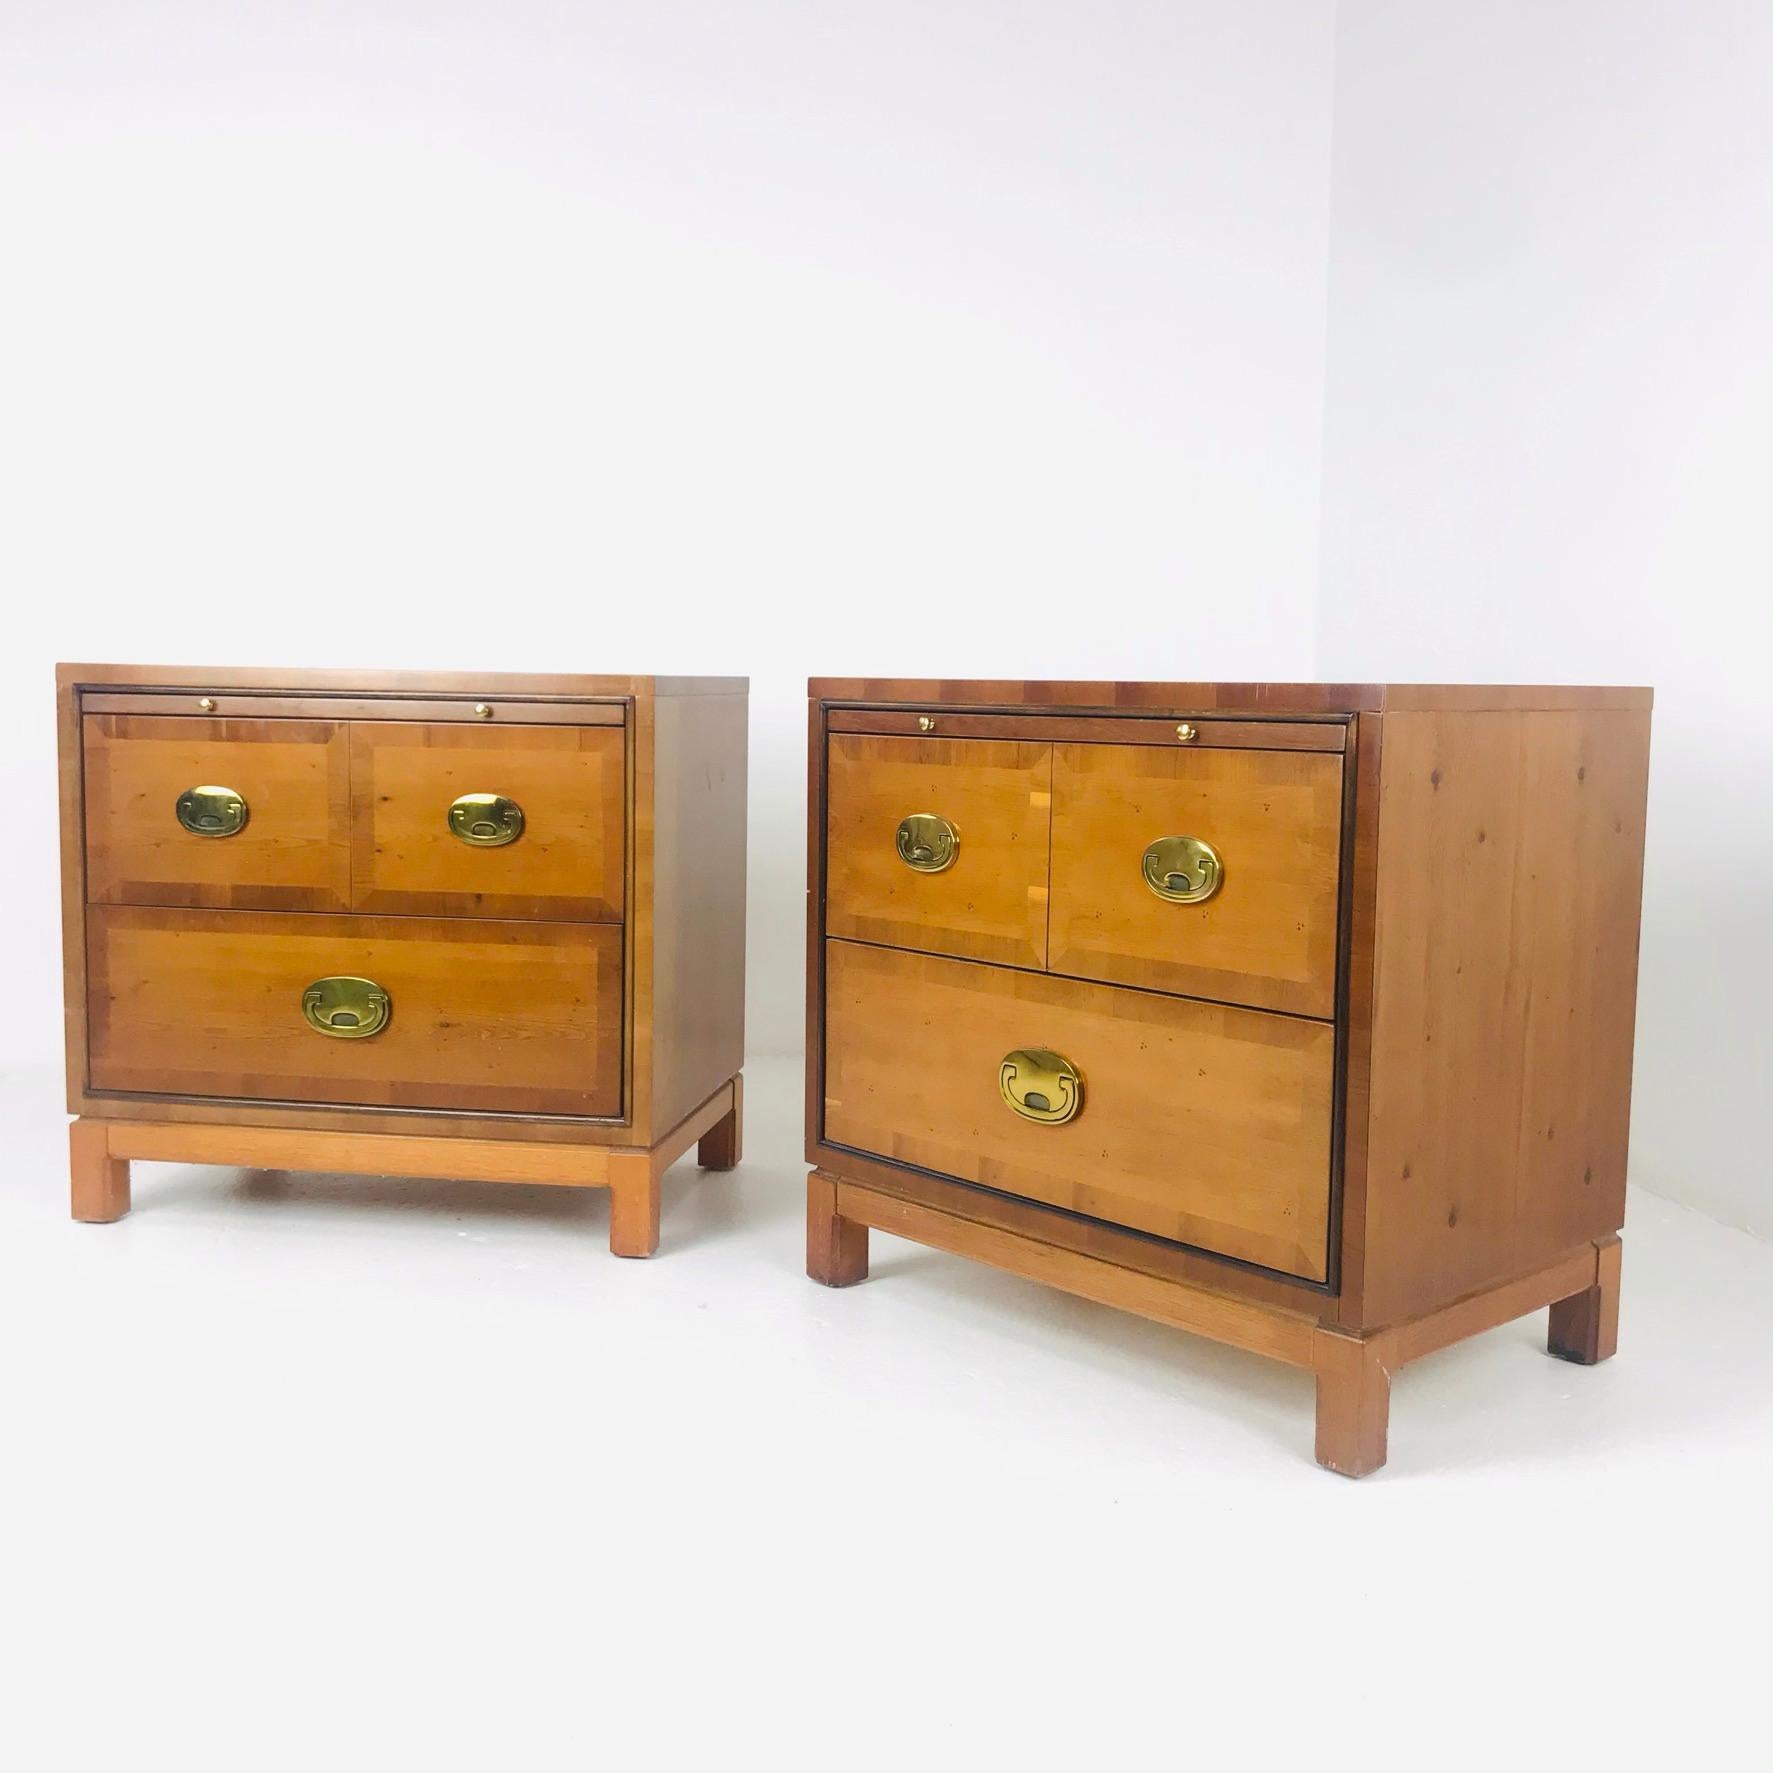 Pair of Hickory campaign style nightstands or three-drawer chests beautifully crafted with a clean modern form. Featuring a pull-out tray, stylized campaign hardware and a Ming style base. Signed Hickory Manufacturing Co. in a drawer.